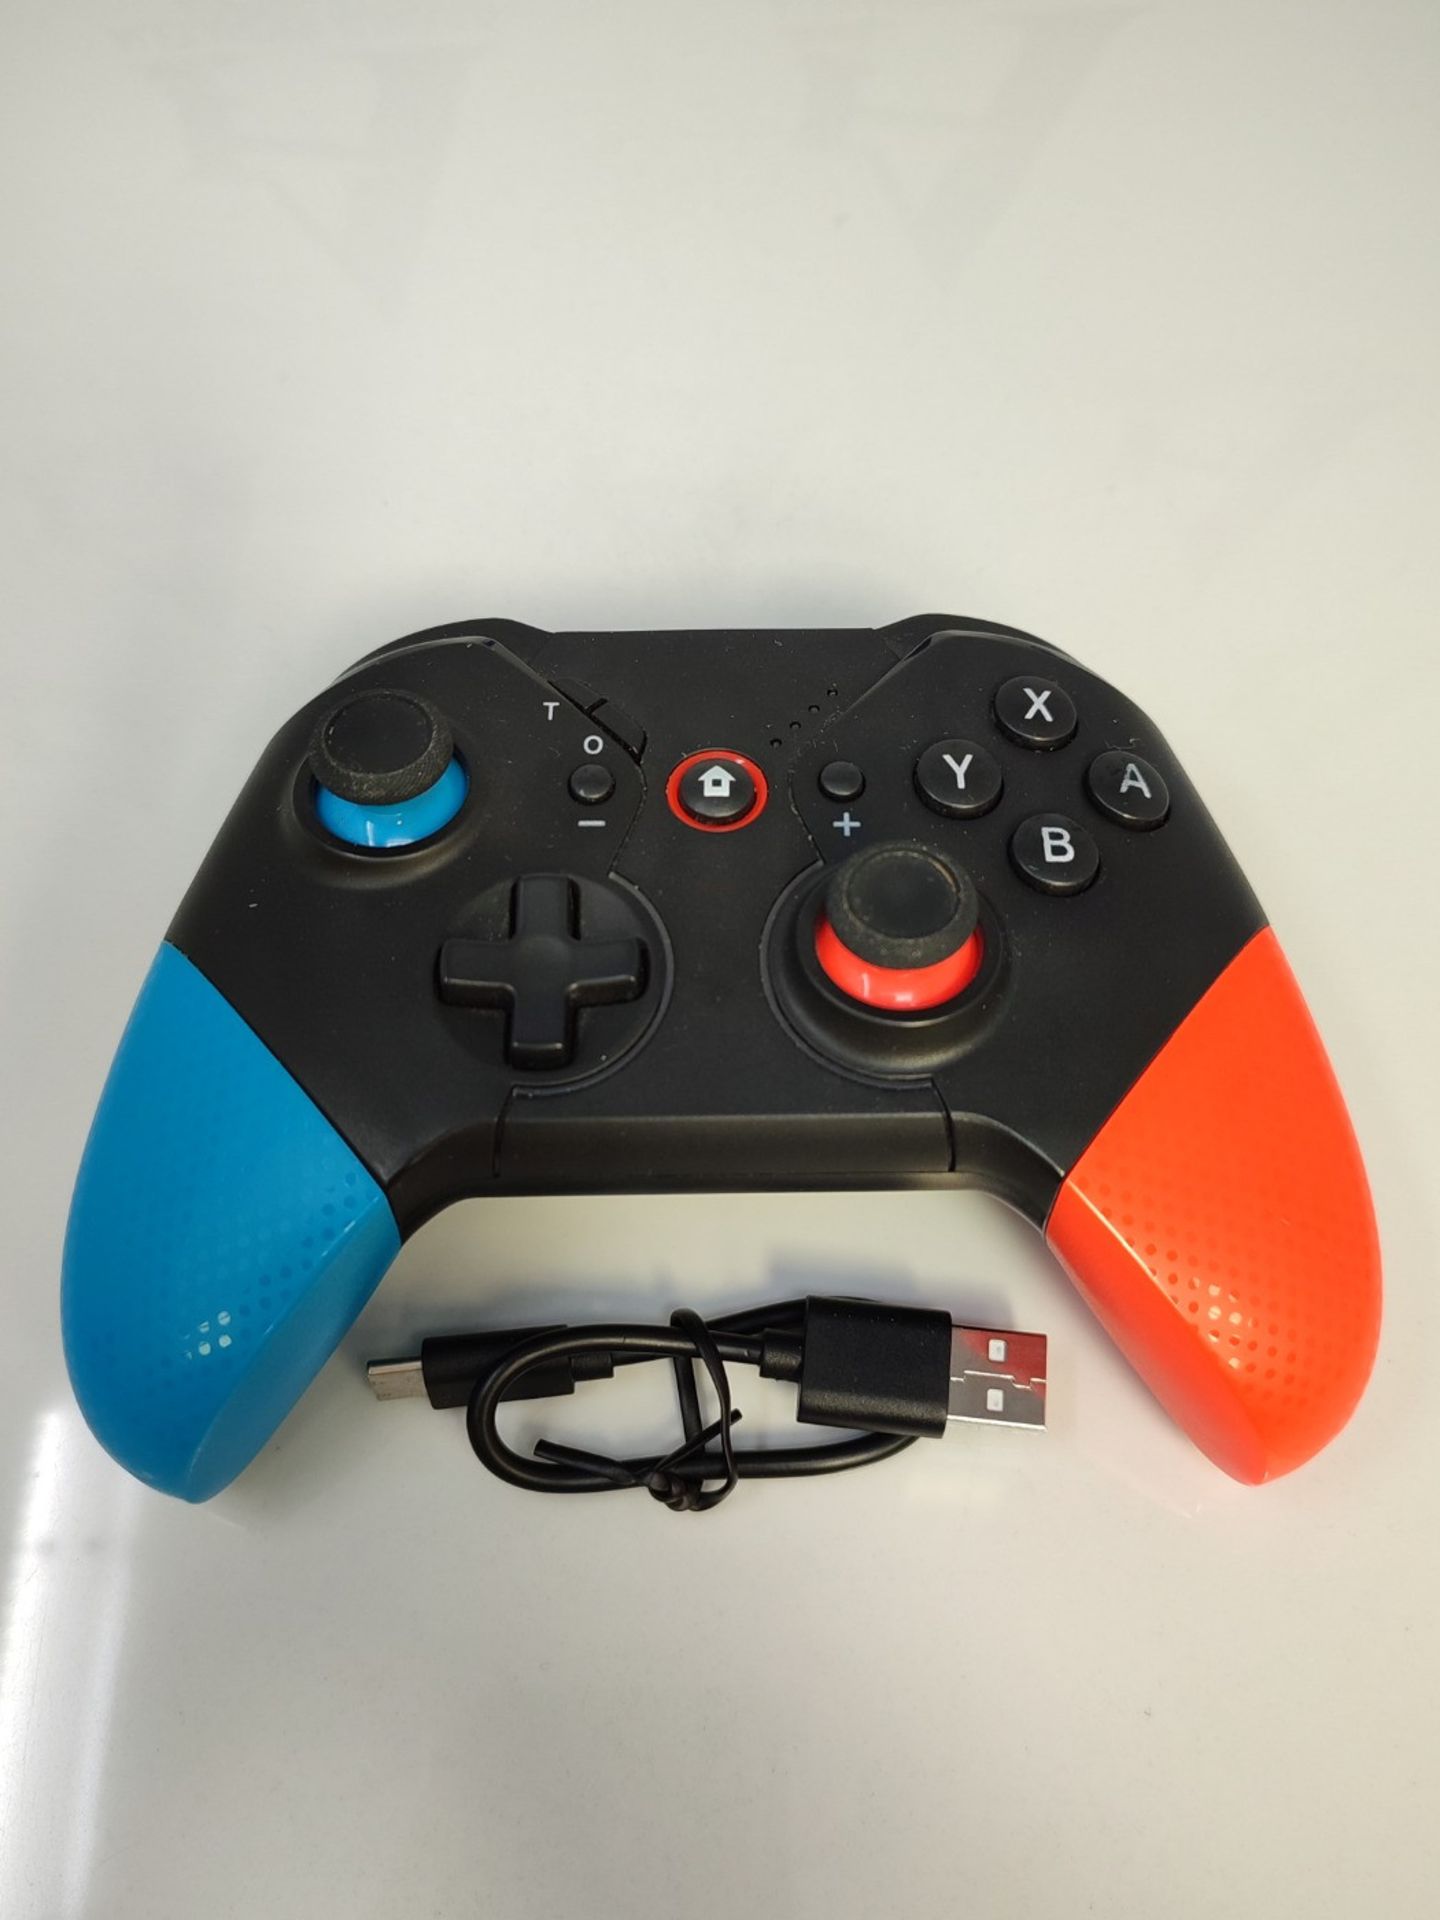 ISENPENK Switch Controller, Wireless Pro Controller for Switch with Wake-up, Bluetooth - Image 2 of 2